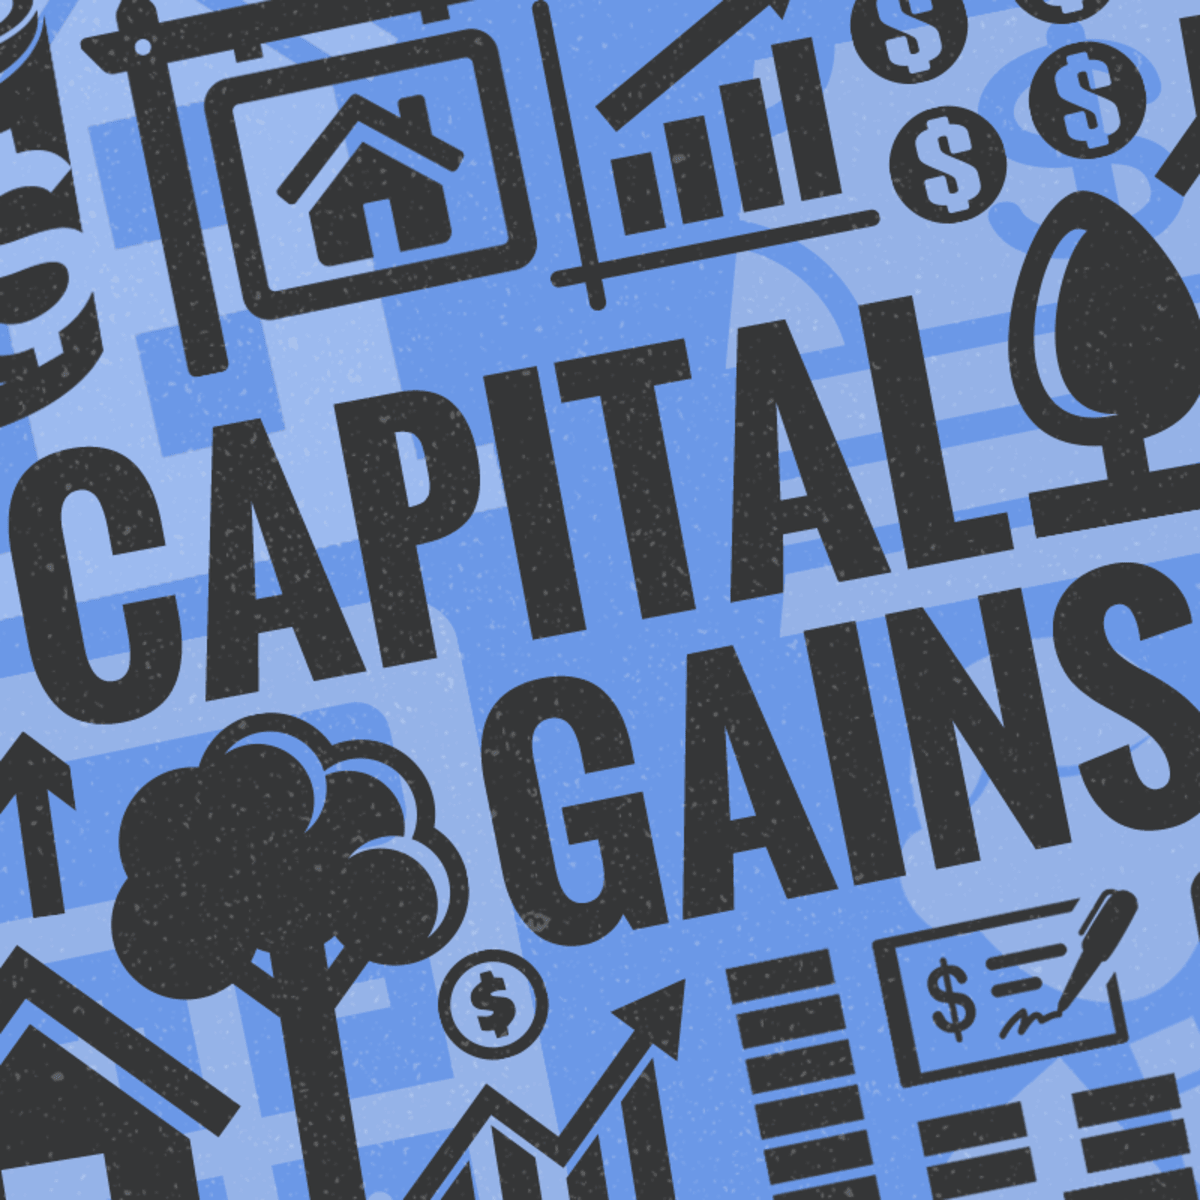 What Is Capital Gains Tax and When Are You Exempt? - TheStreet